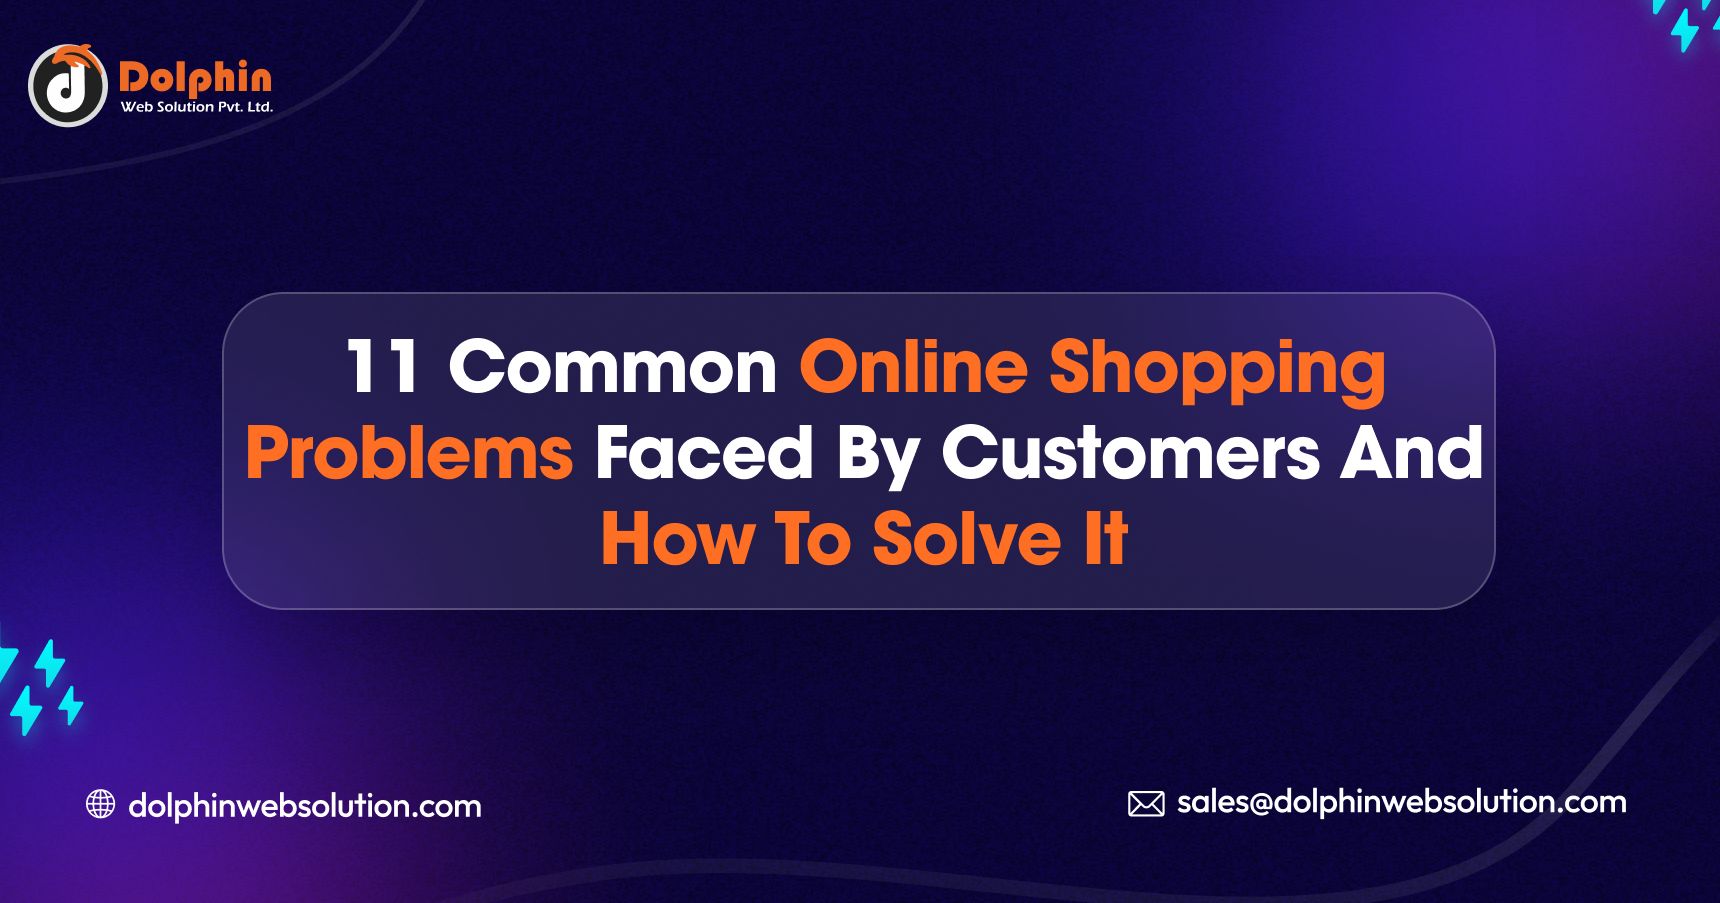 11 Common Online Shopping Problems Faced by Customers and How to Solve it